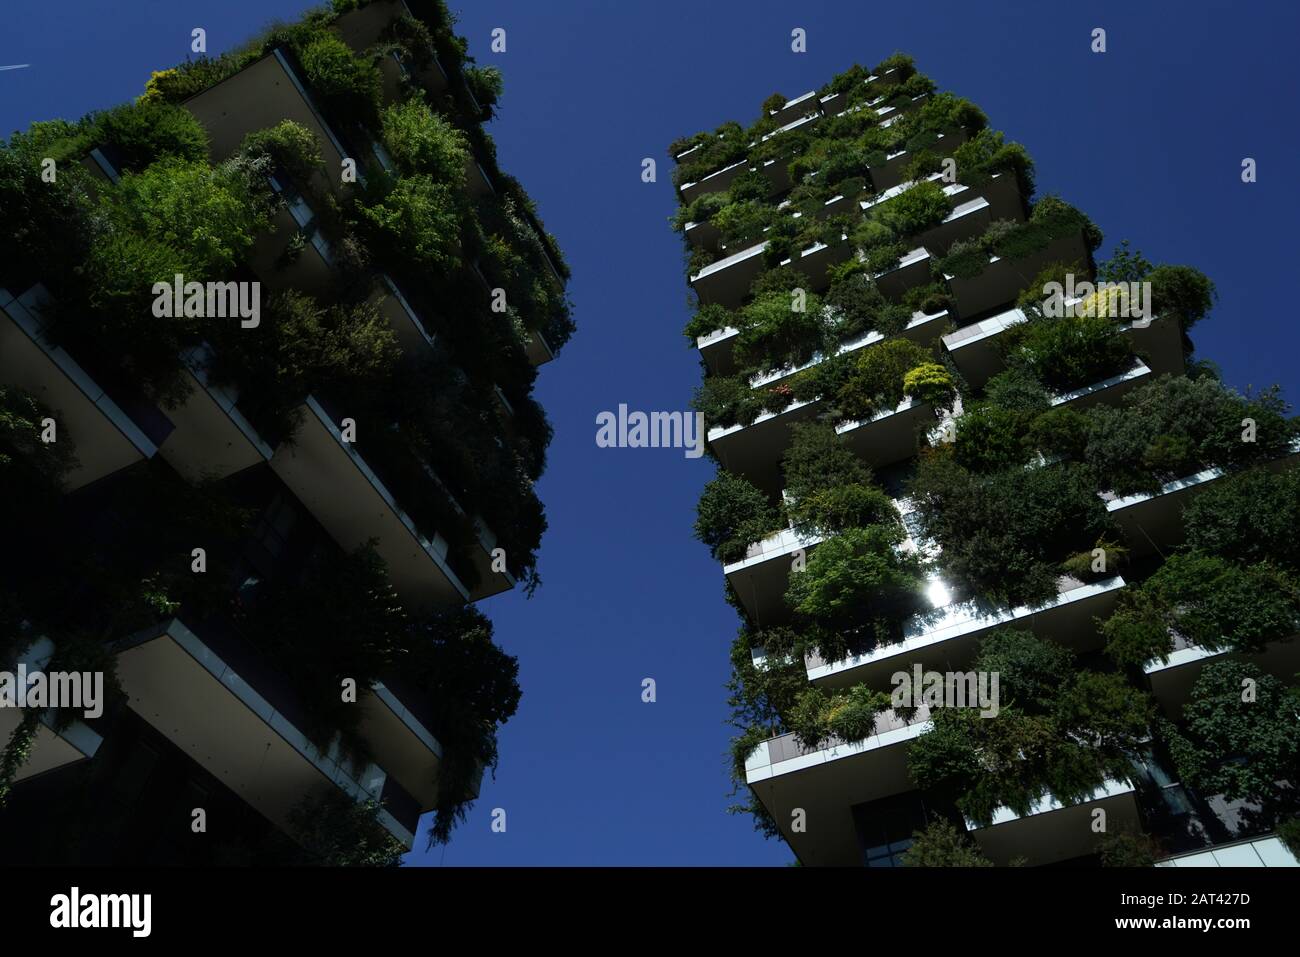 Bosco Verticale, Vertical Forest is a pair of residential towers designed by Boeri Studio in the Porta Nuova district, Bosco Verticale won the Interna Stock Photo